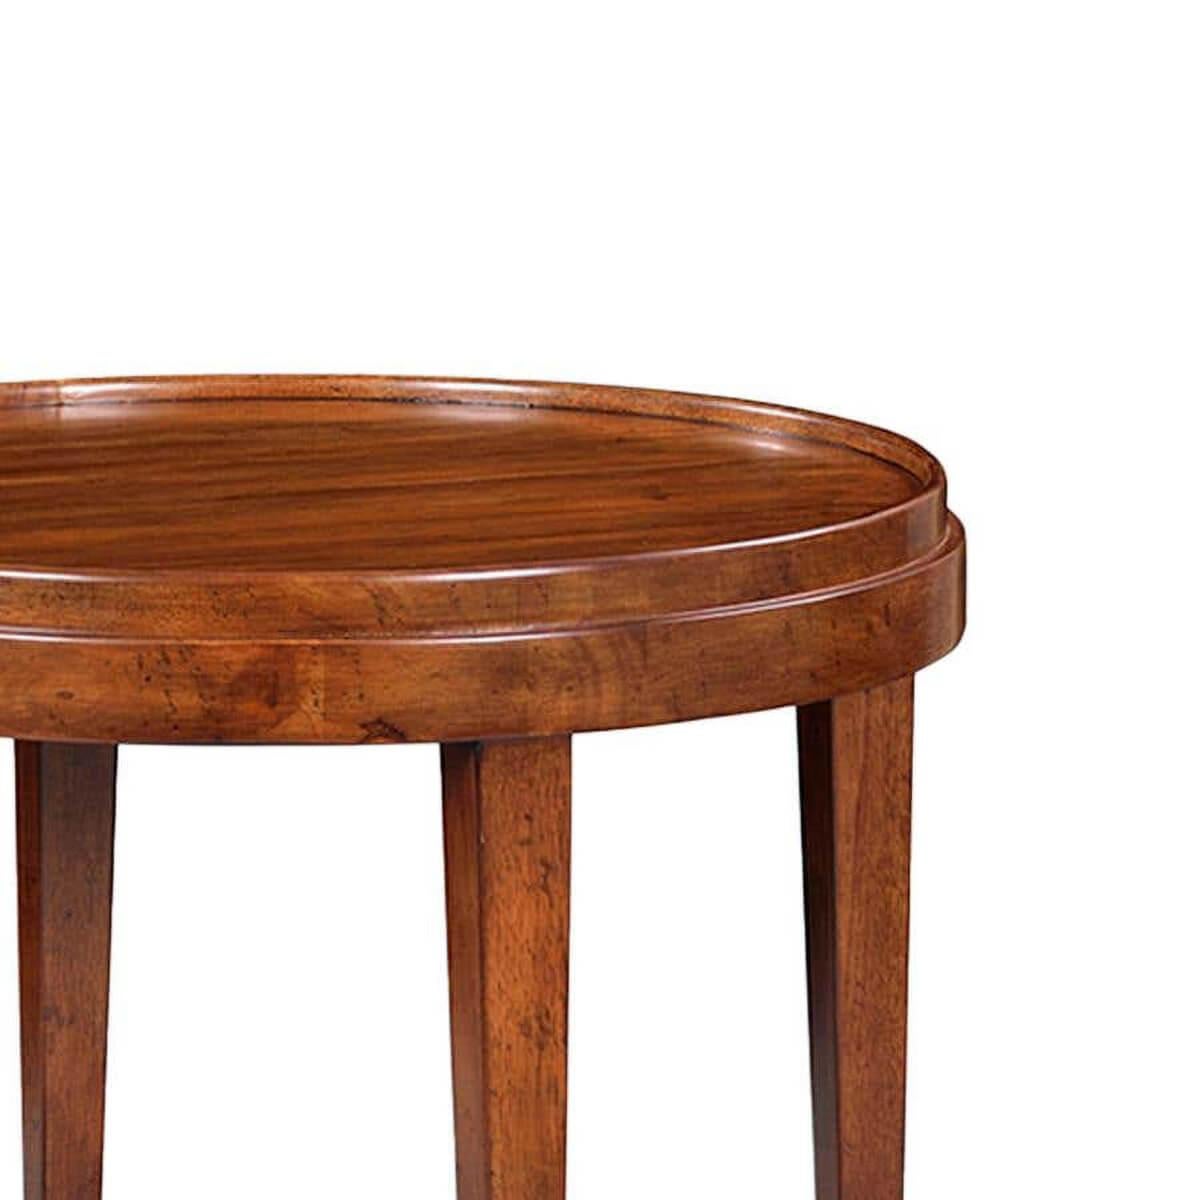 A Classic style round end table with a rustic warm walnut stained finish. The two-tier side table with a wooden galleried dish top, with square tapered legs and a round shelf stretcher base.

Dimensions: 27